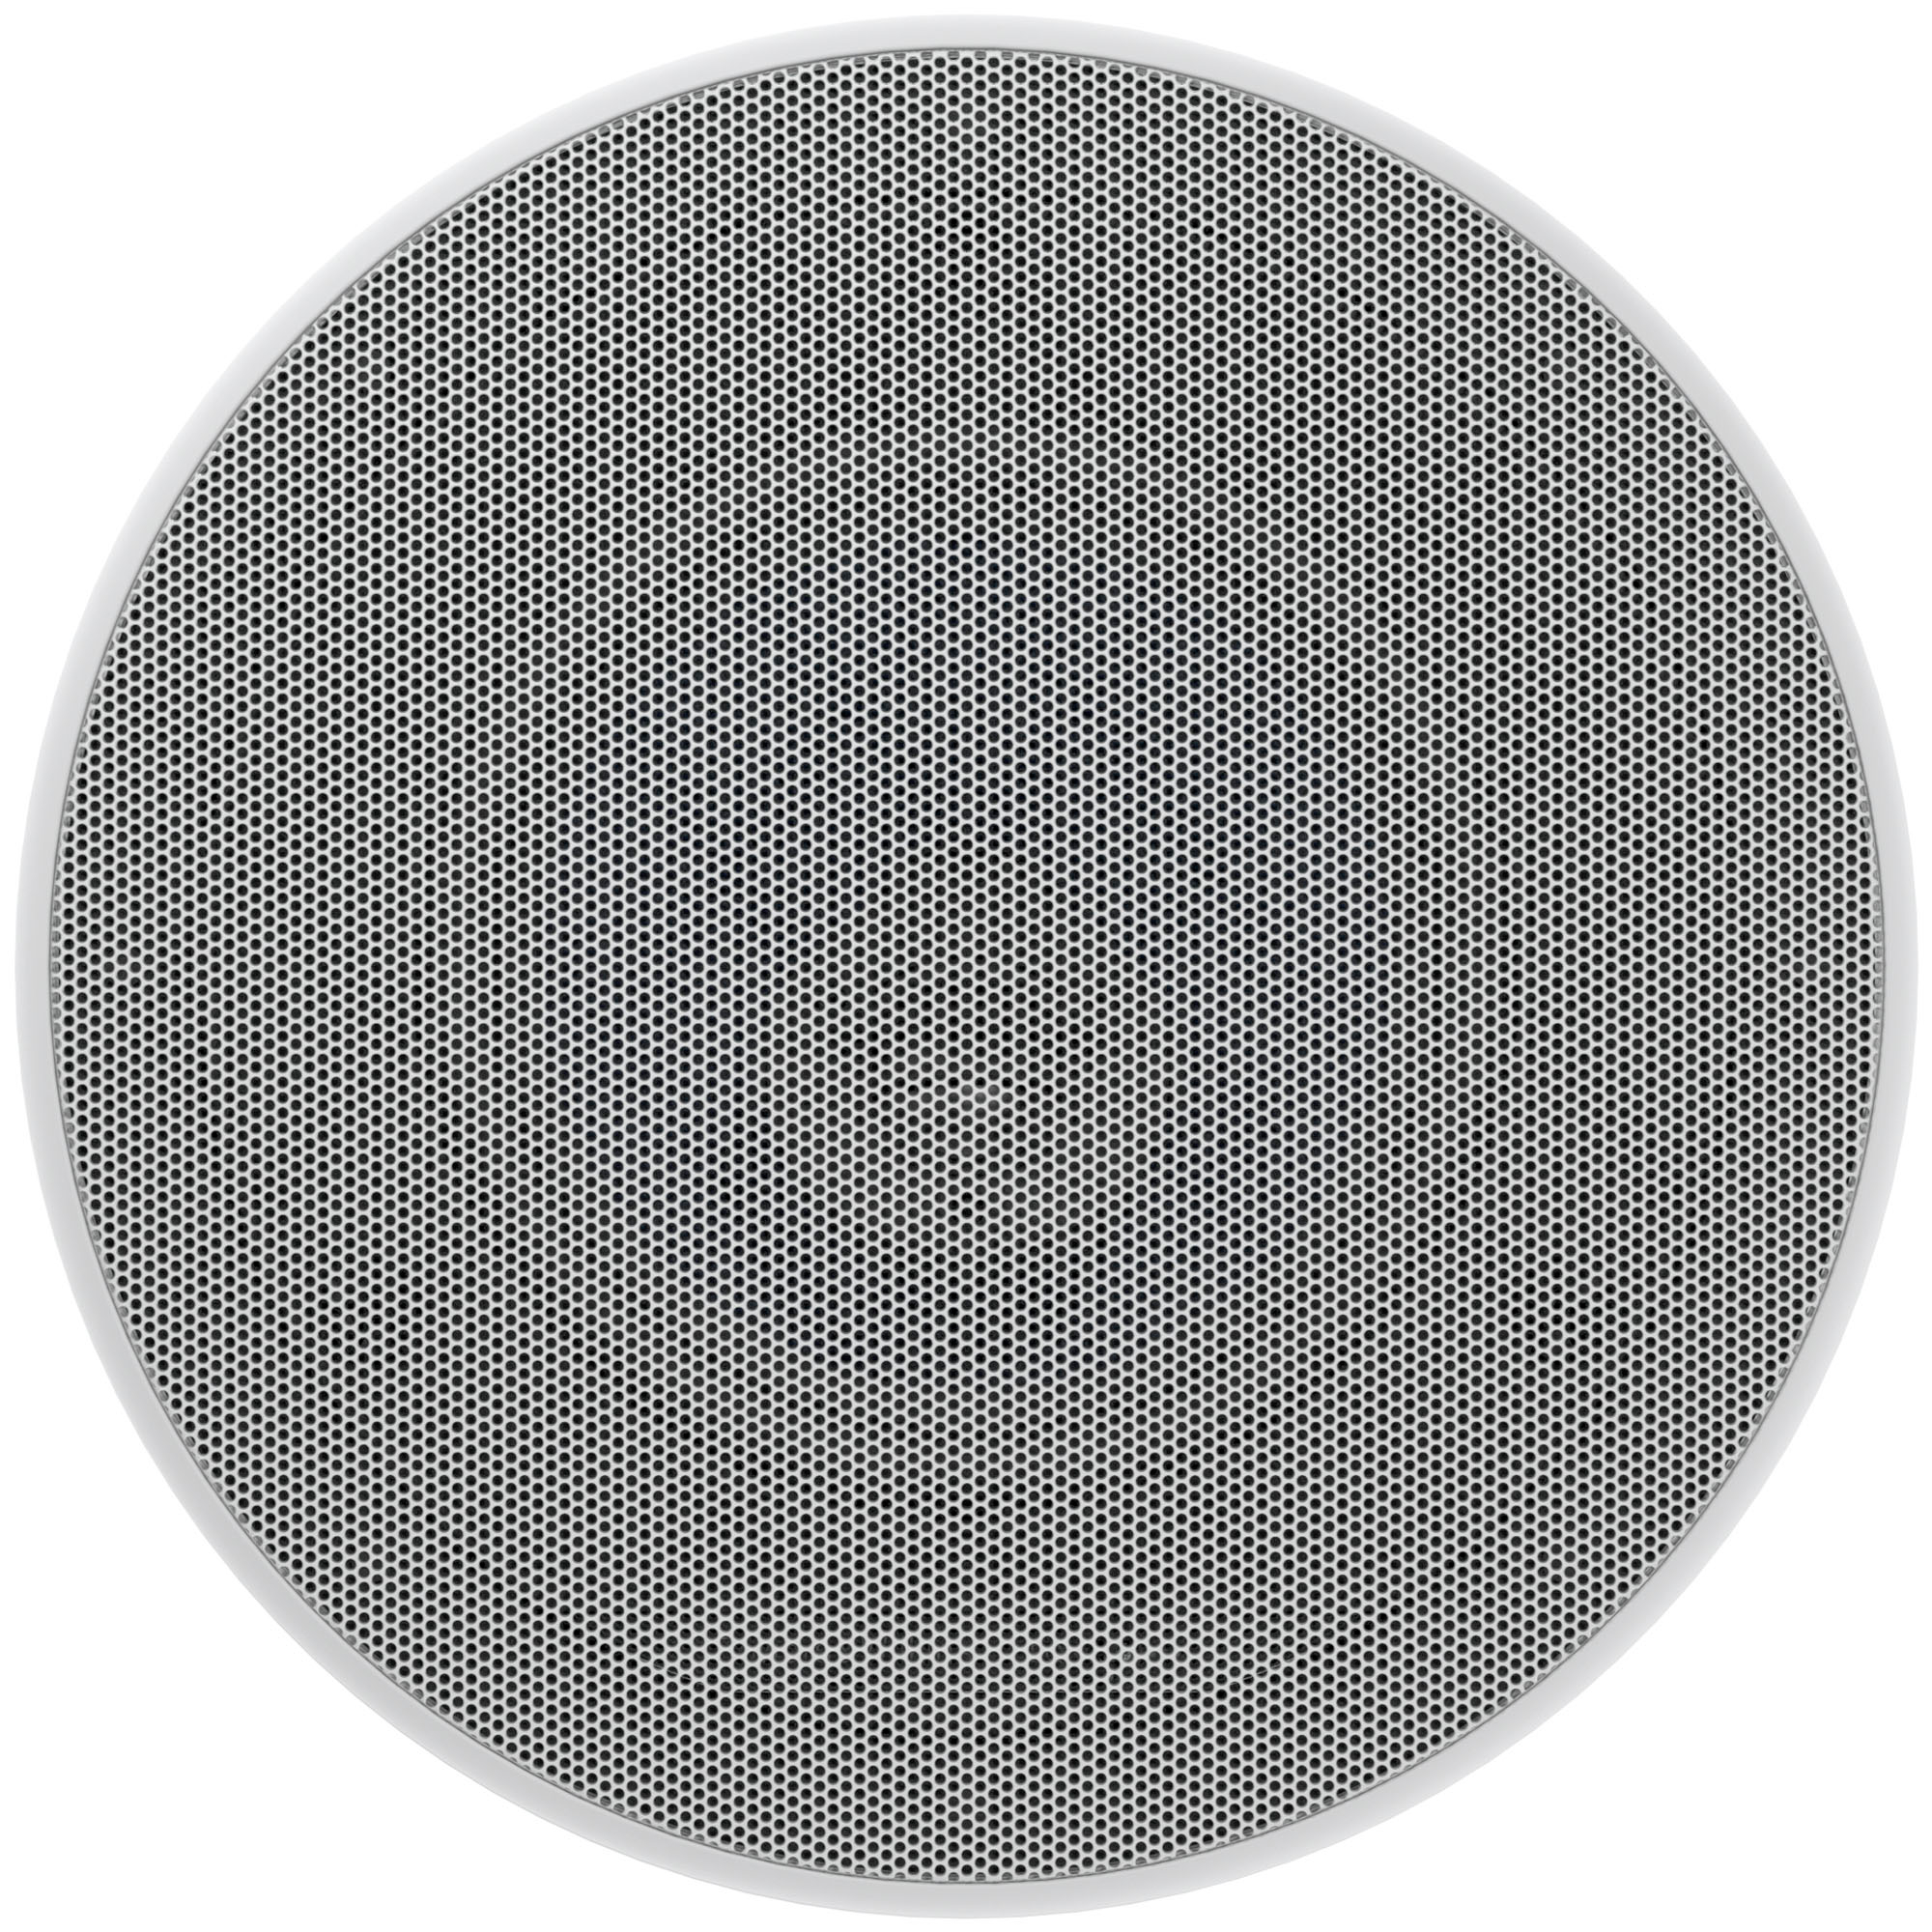 Angle View: Definitive Technology - DT Series 6.5" 2-Way In-Ceiling Speaker (Each) - Black